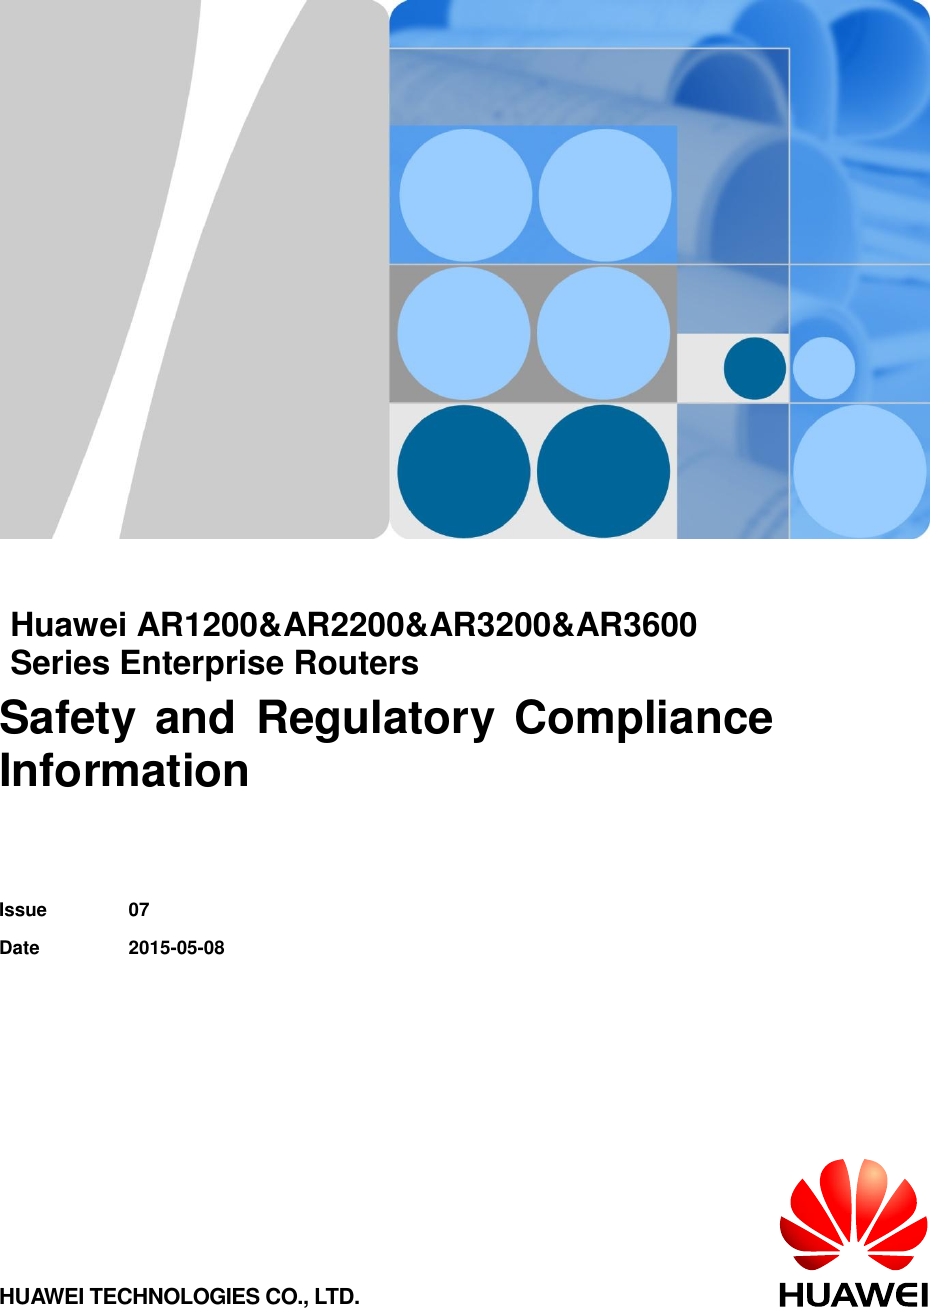          Huawei AR1200&amp;AR2200&amp;AR3200&amp;AR3600 Series Enterprise Routers   Safety and Regulatory Compliance Information   Issue 07 Date 2015-05-08  HUAWEI TECHNOLOGIES CO., LTD.  